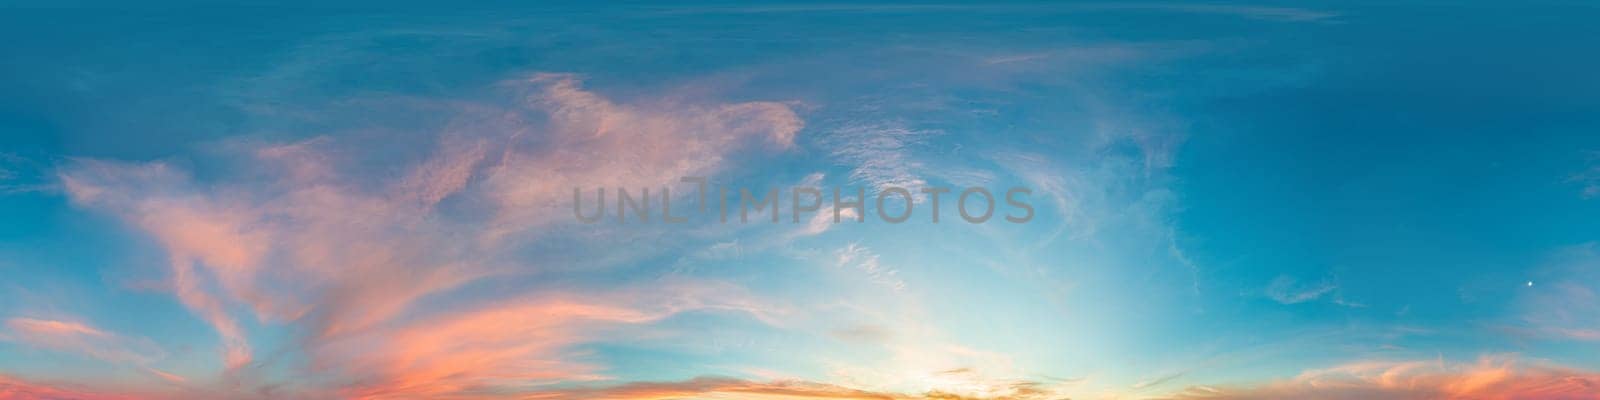 Sunset sky panorama with bright glowing pink Cirrus clouds. HDR 360 seamless spherical panorama. Full zenith or sky dome for 3D visualization, sky replacement for aerial drone panoramas. by Matiunina